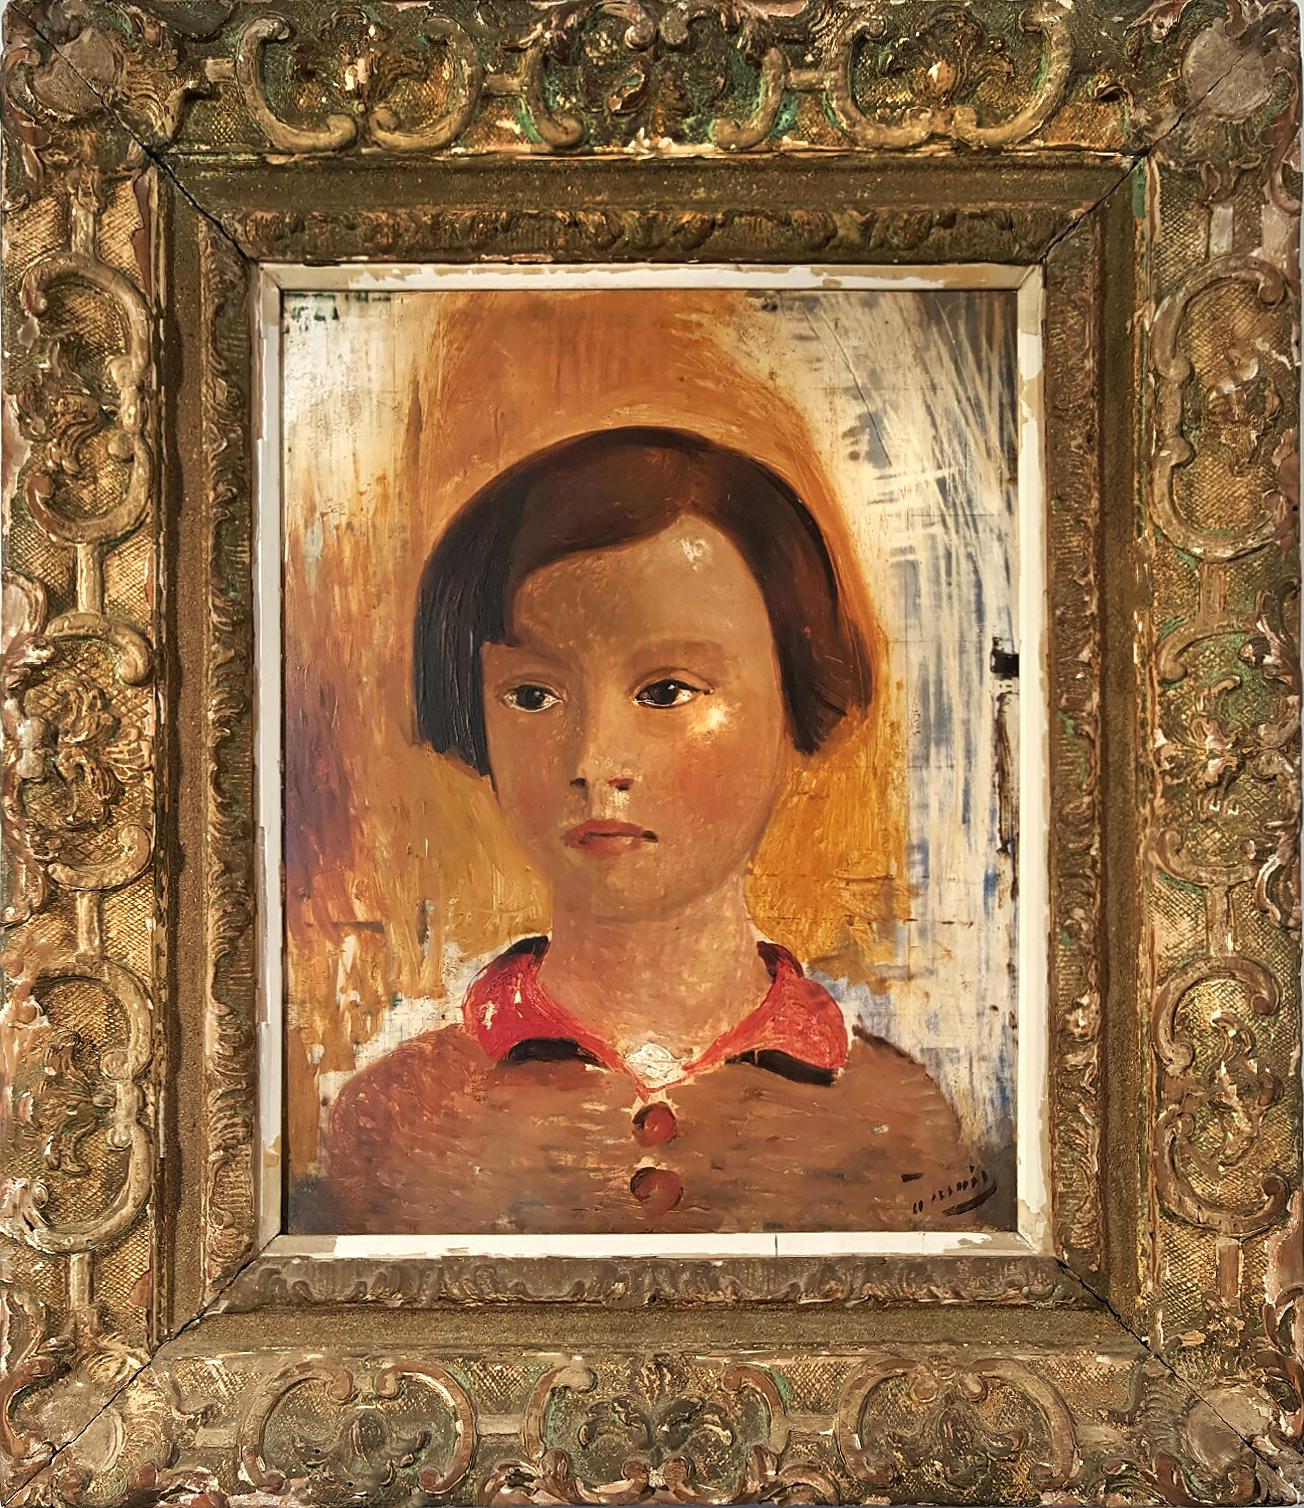 A charming and sensitive portrait of a young  French girl is captured with quick action broad brush strokes. The surface texture simultaneously is composed of impasto and incised strokes into the surface of the wooden board creating a dimensional